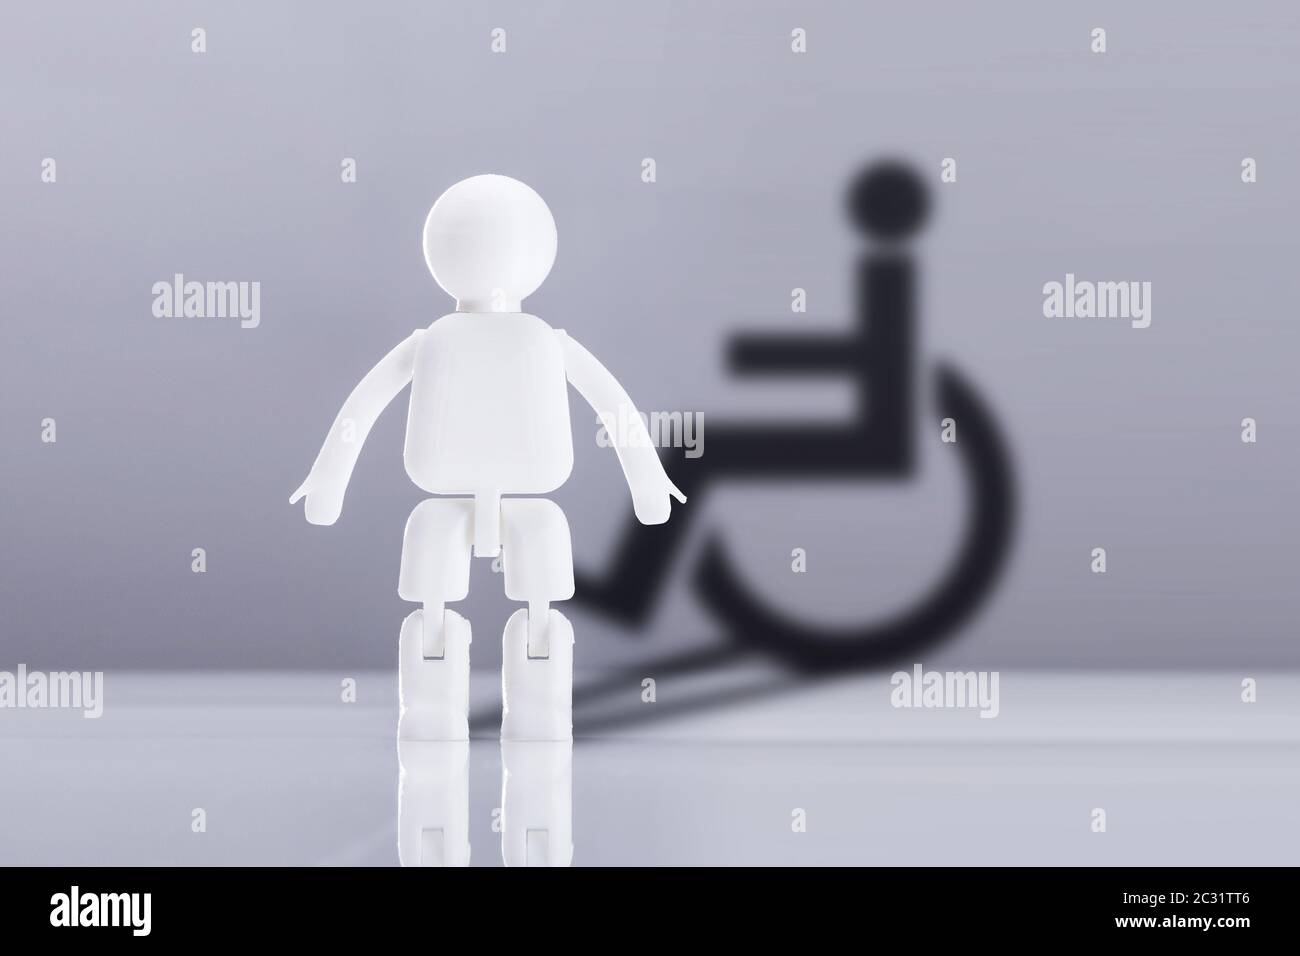 White Human Figure On Reflective Desk Against Grey Background With Shadow Of Disable Icon Stock Photo